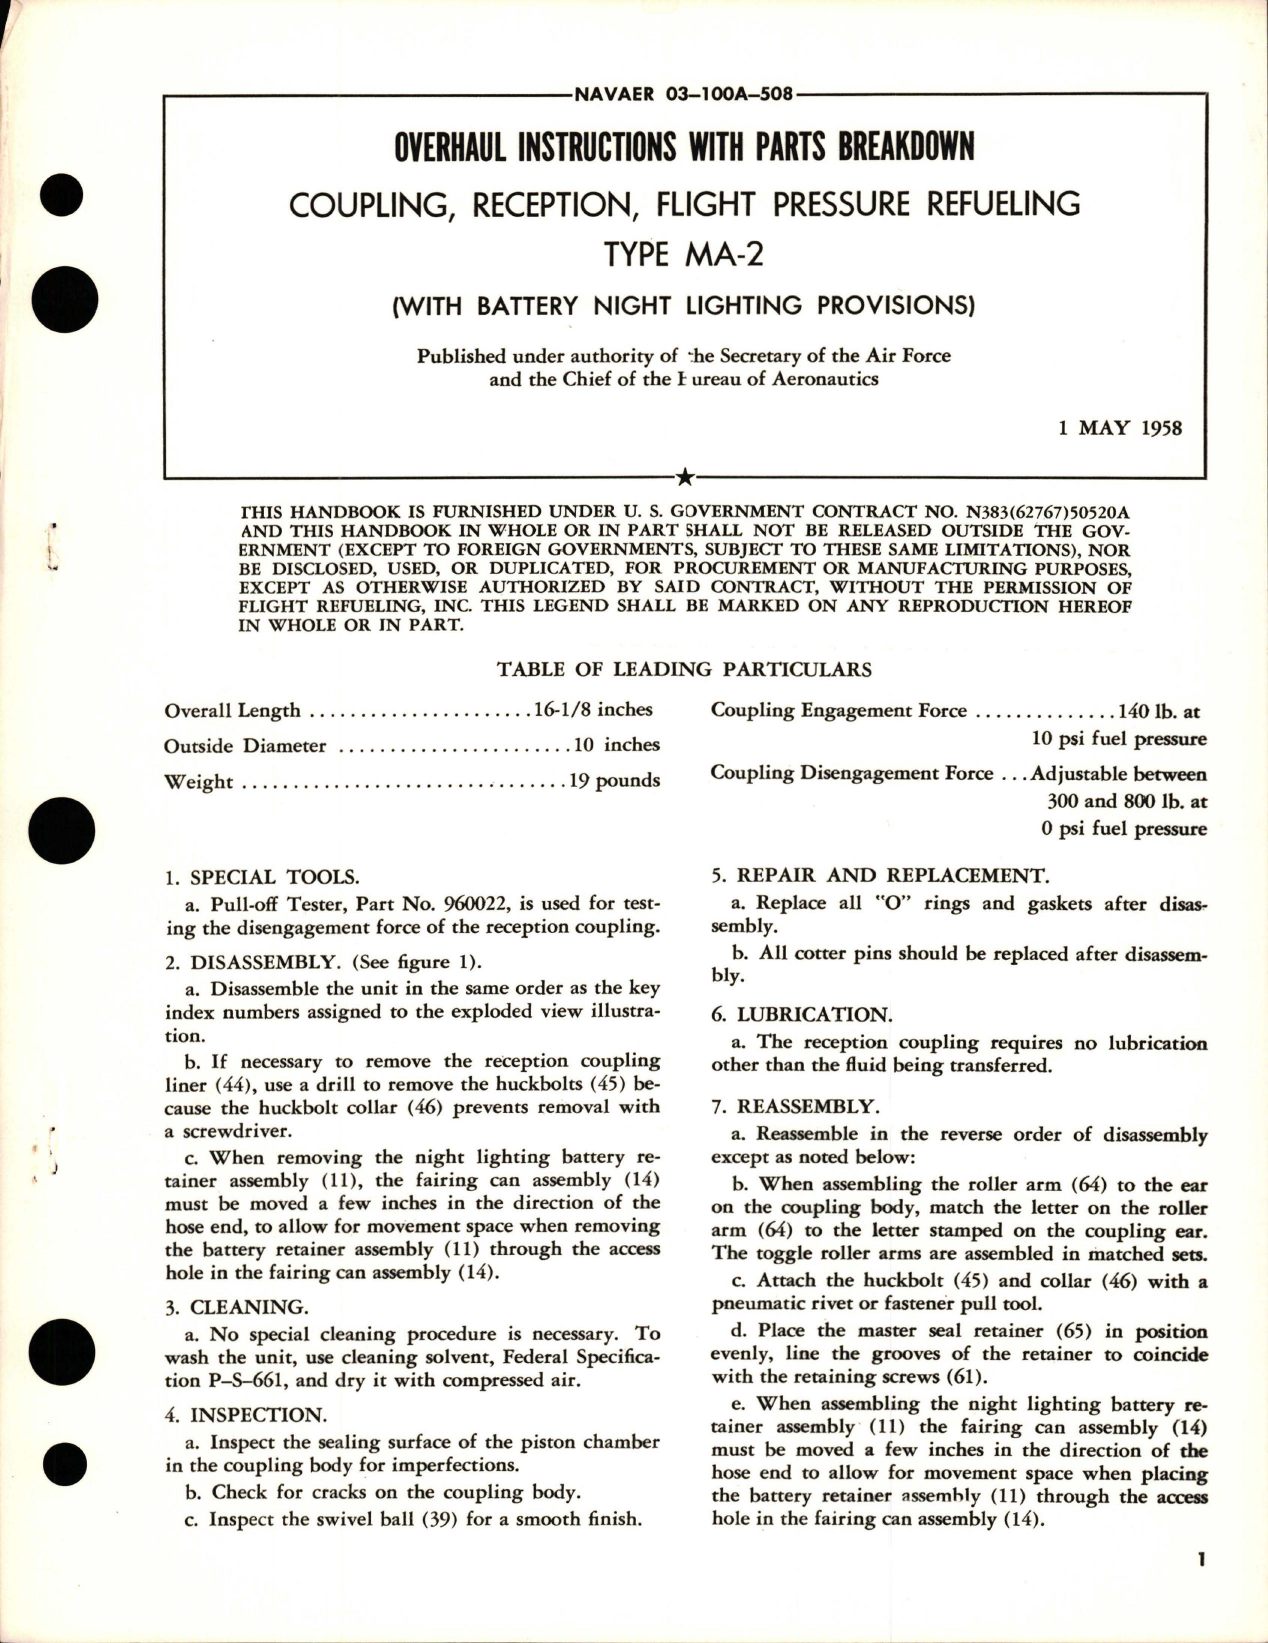 Sample page 1 from AirCorps Library document: Overhaul Instructions with Parts Breakdown for Flight Pressure Refueling - Coupling - Reception with Battery Night Lighting Provisions - Type MA-2